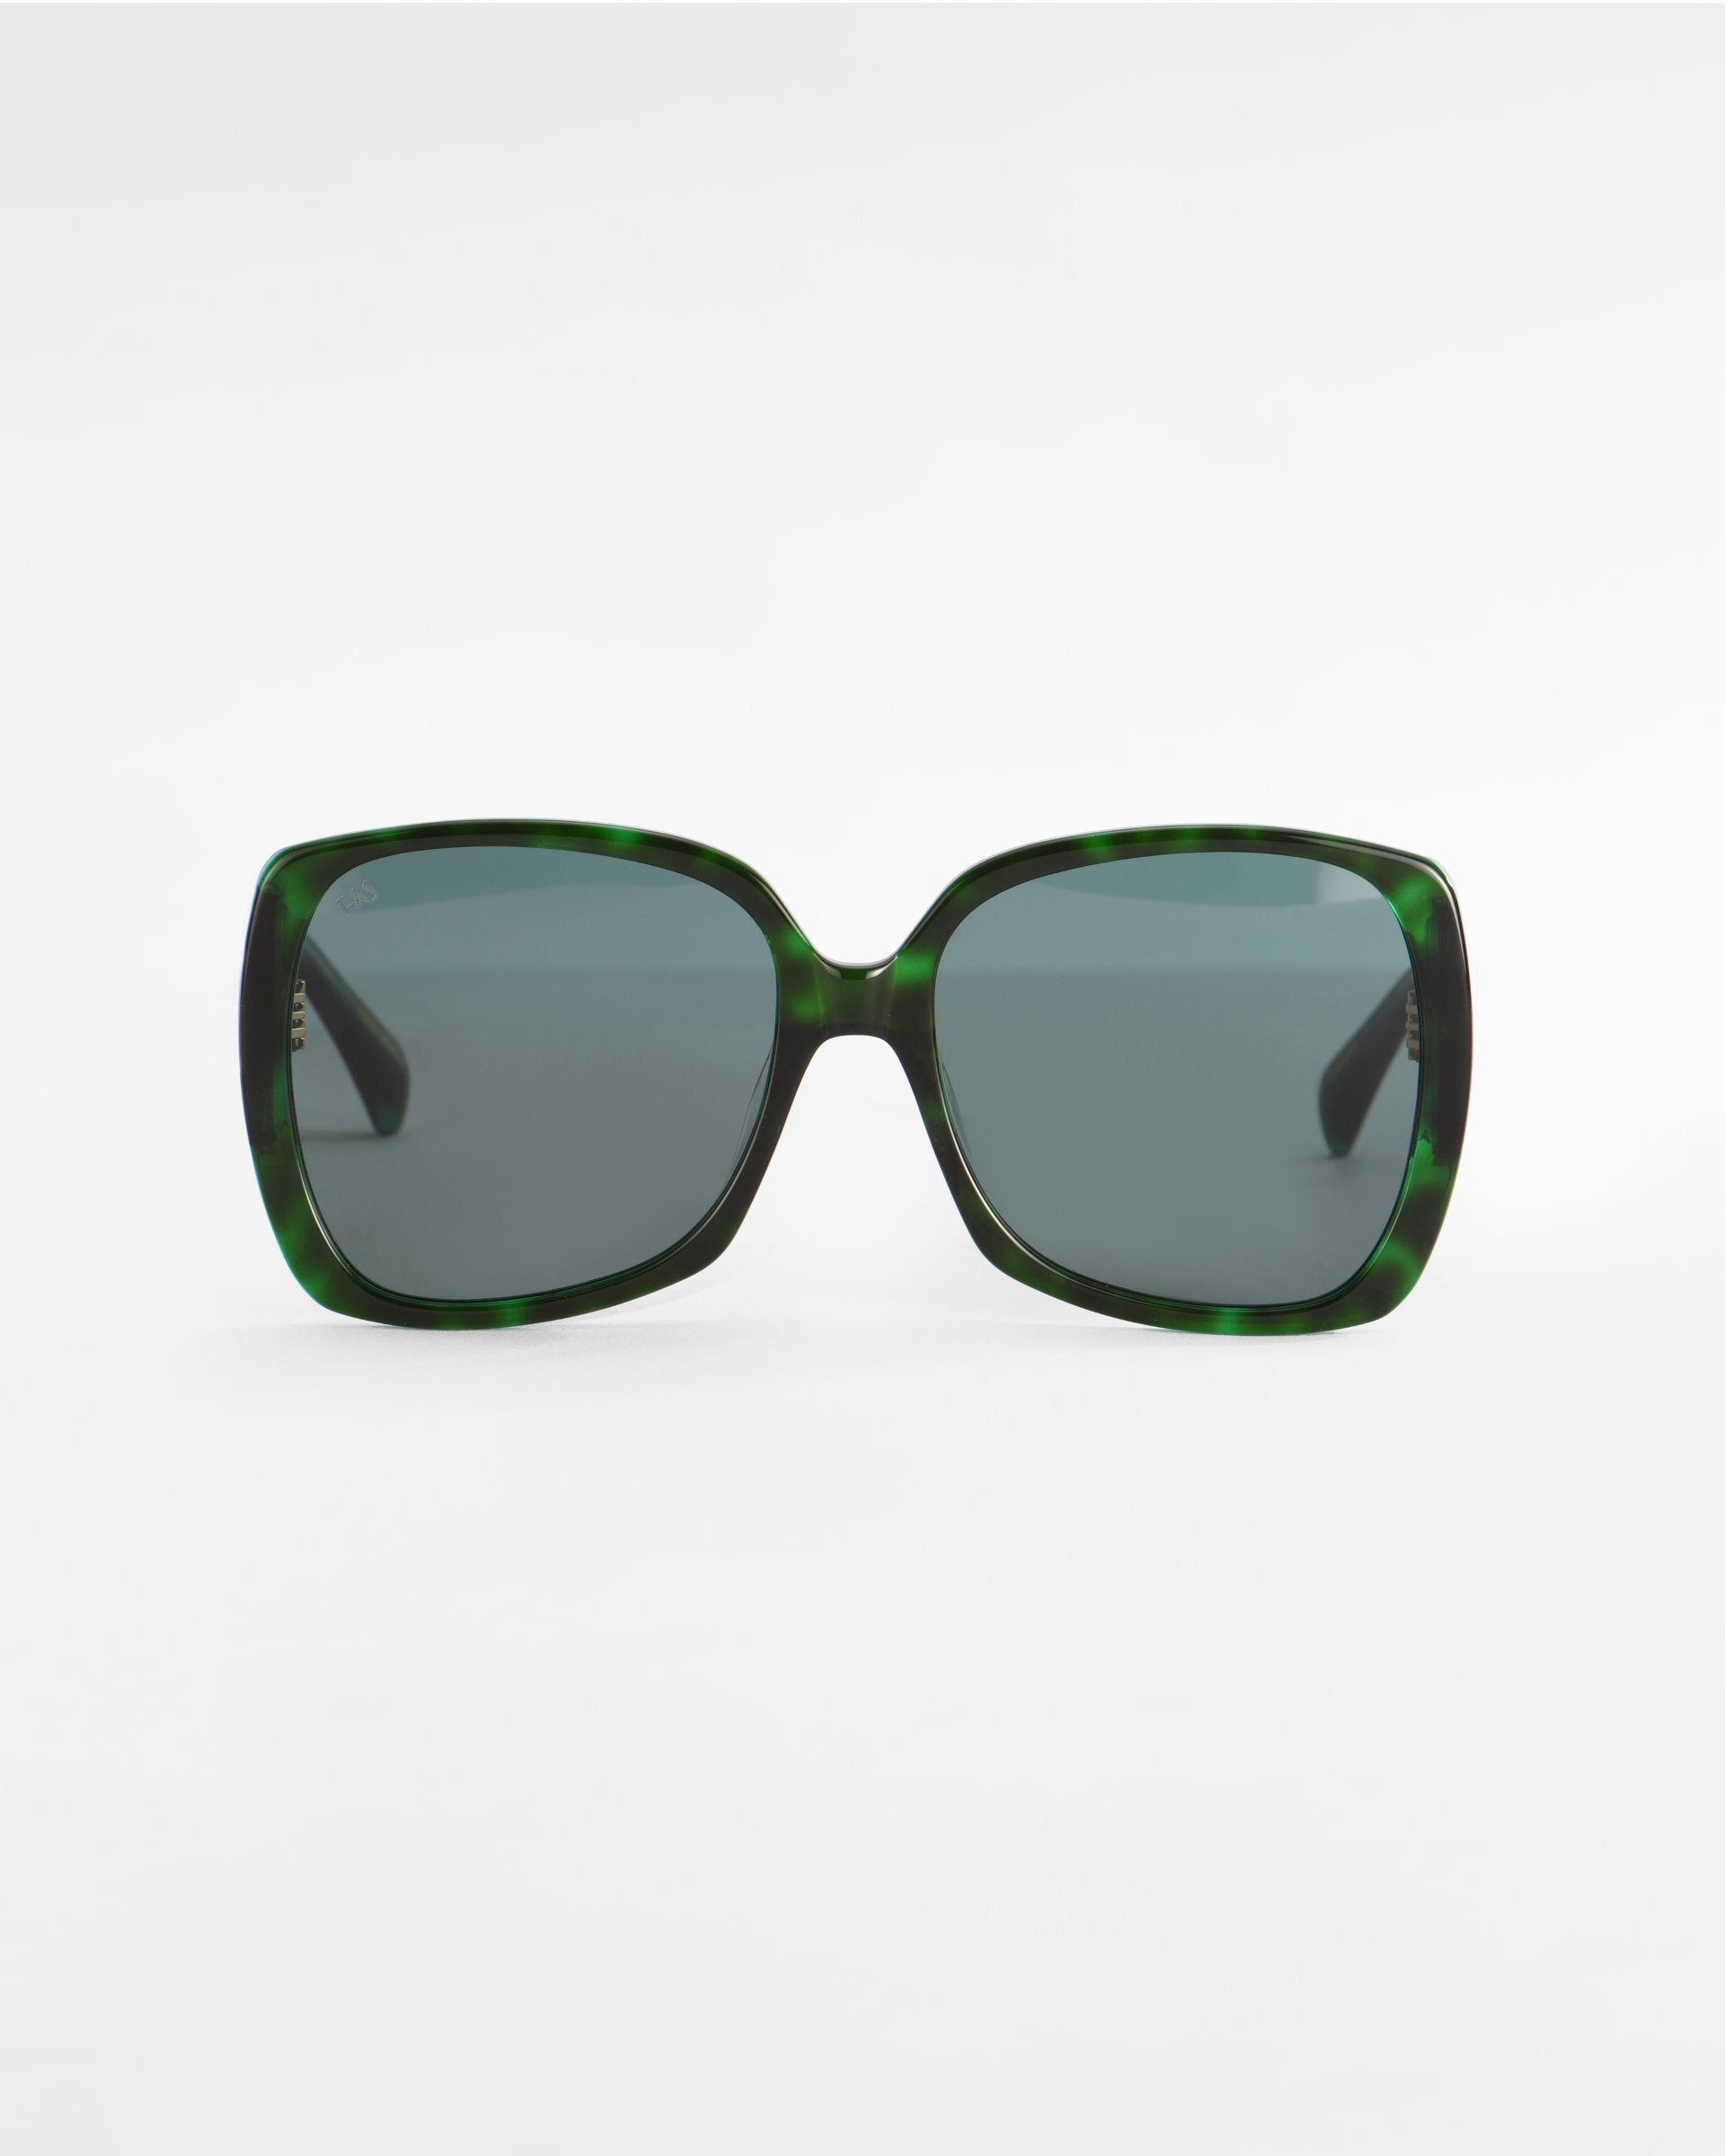 A pair of green, square-shaped Odyssey sunglasses by For Art's Sake® with dark tinted, lightweight nylon lenses against a plain white background. The frame features plant-based acetate with a subtle marbled pattern, adding a textured look.